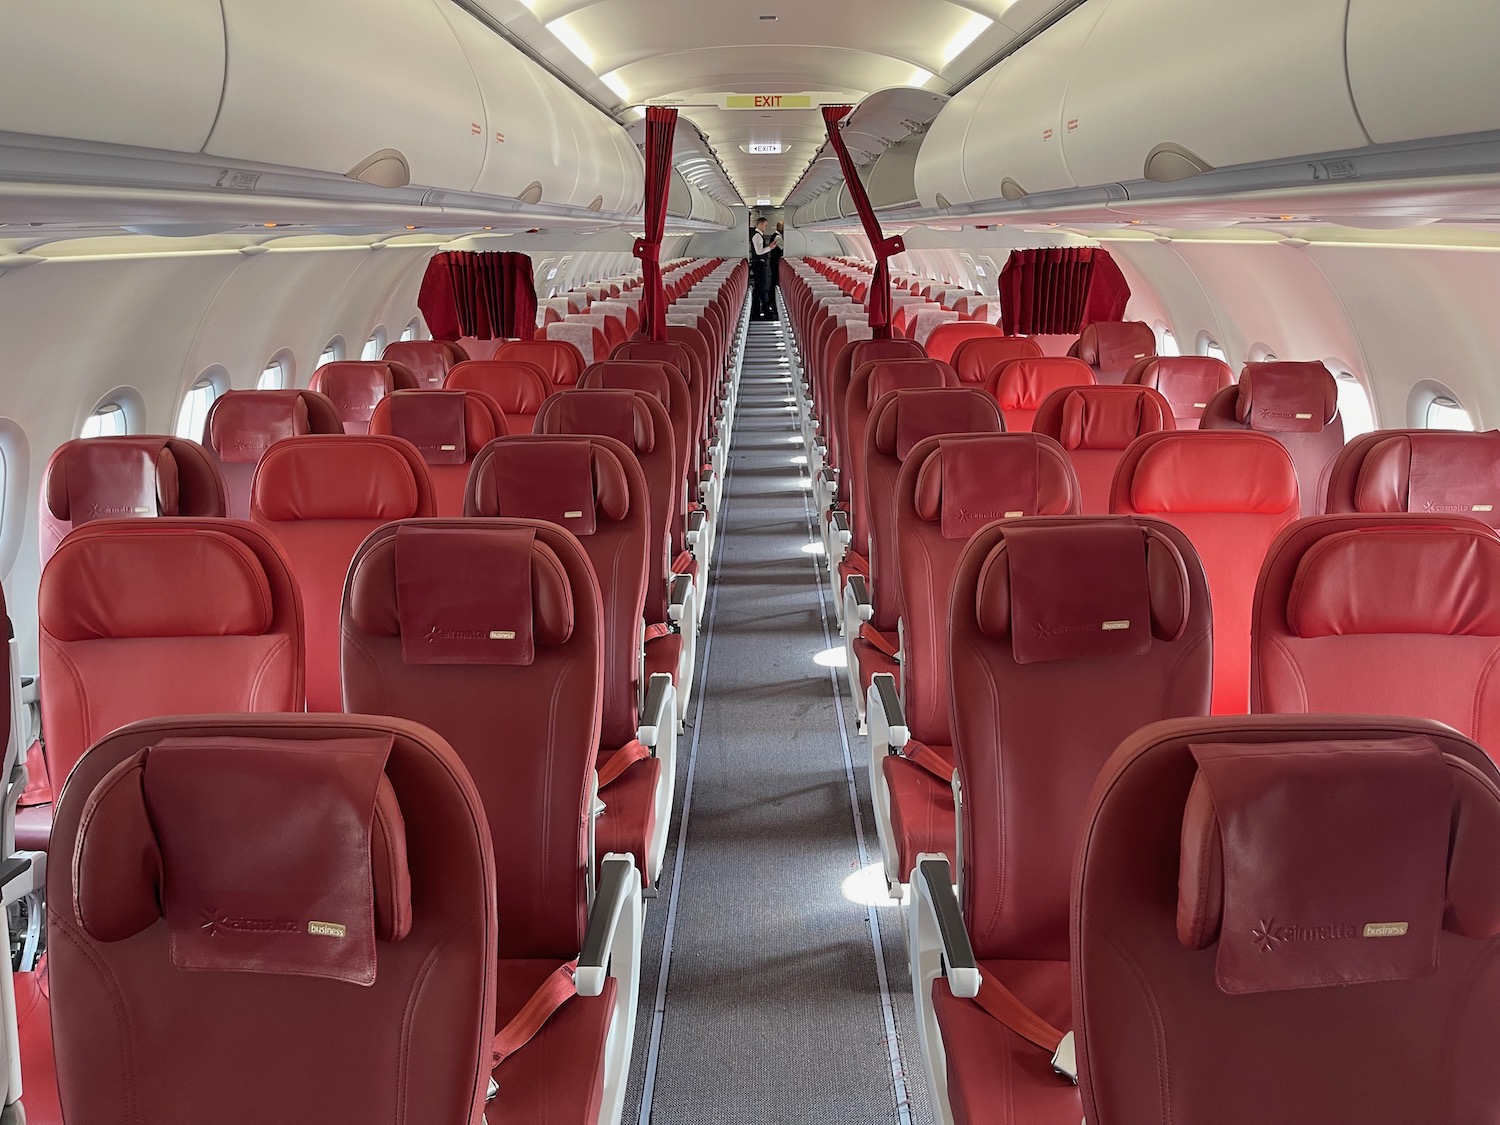 a row of red seats on an airplane